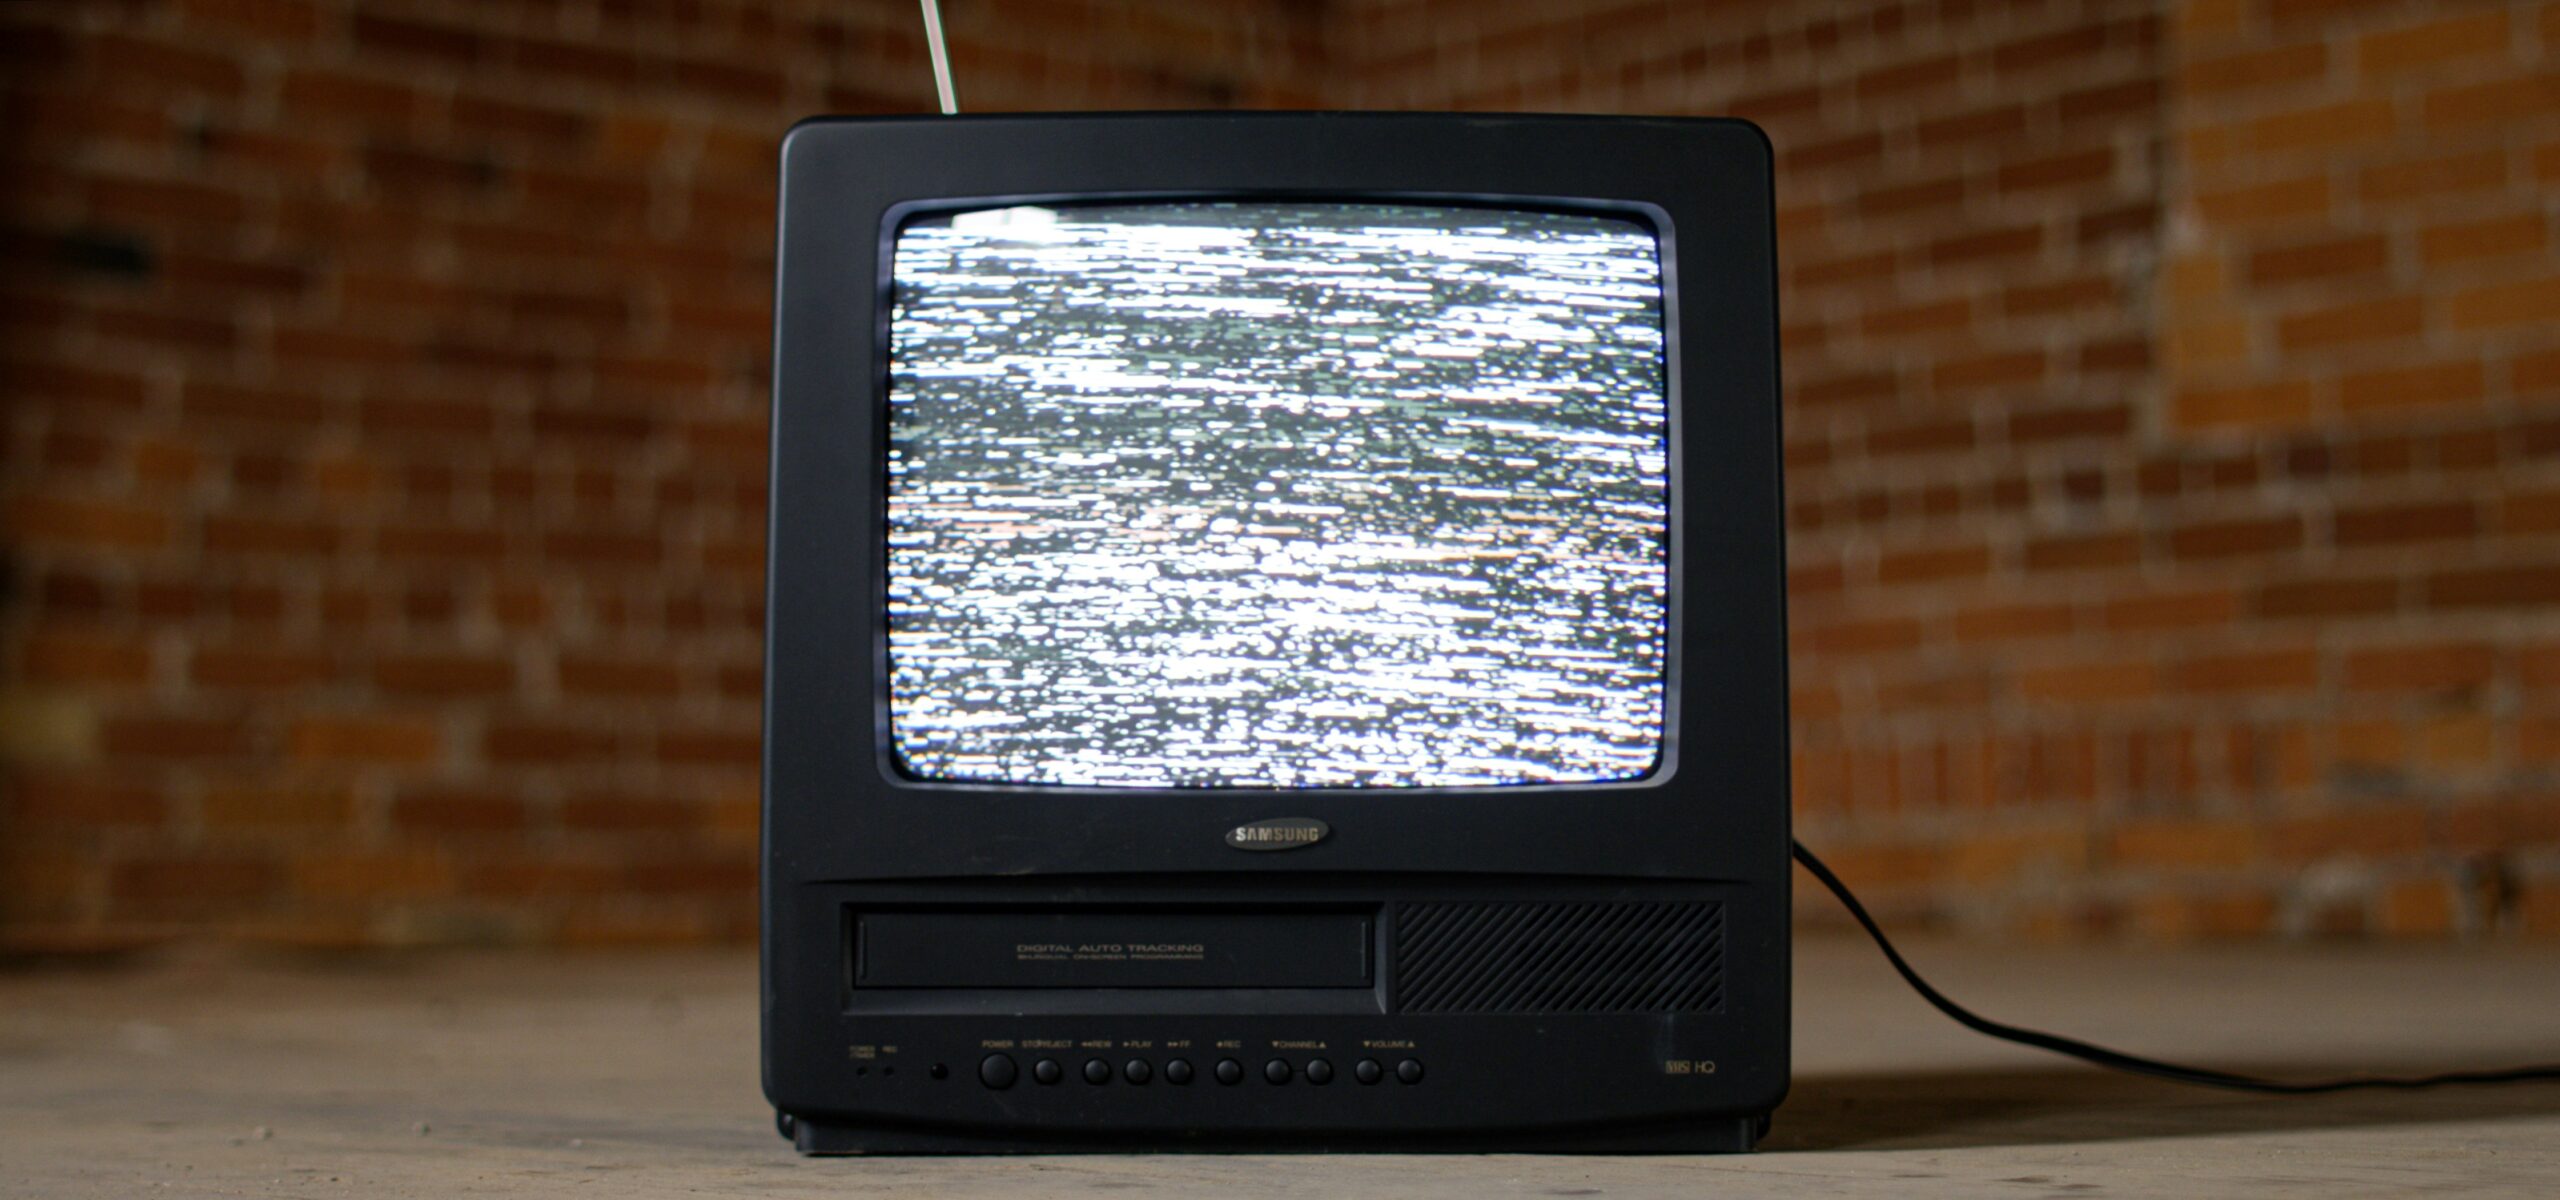 An old television from the end of the 90s beginning of 2000s